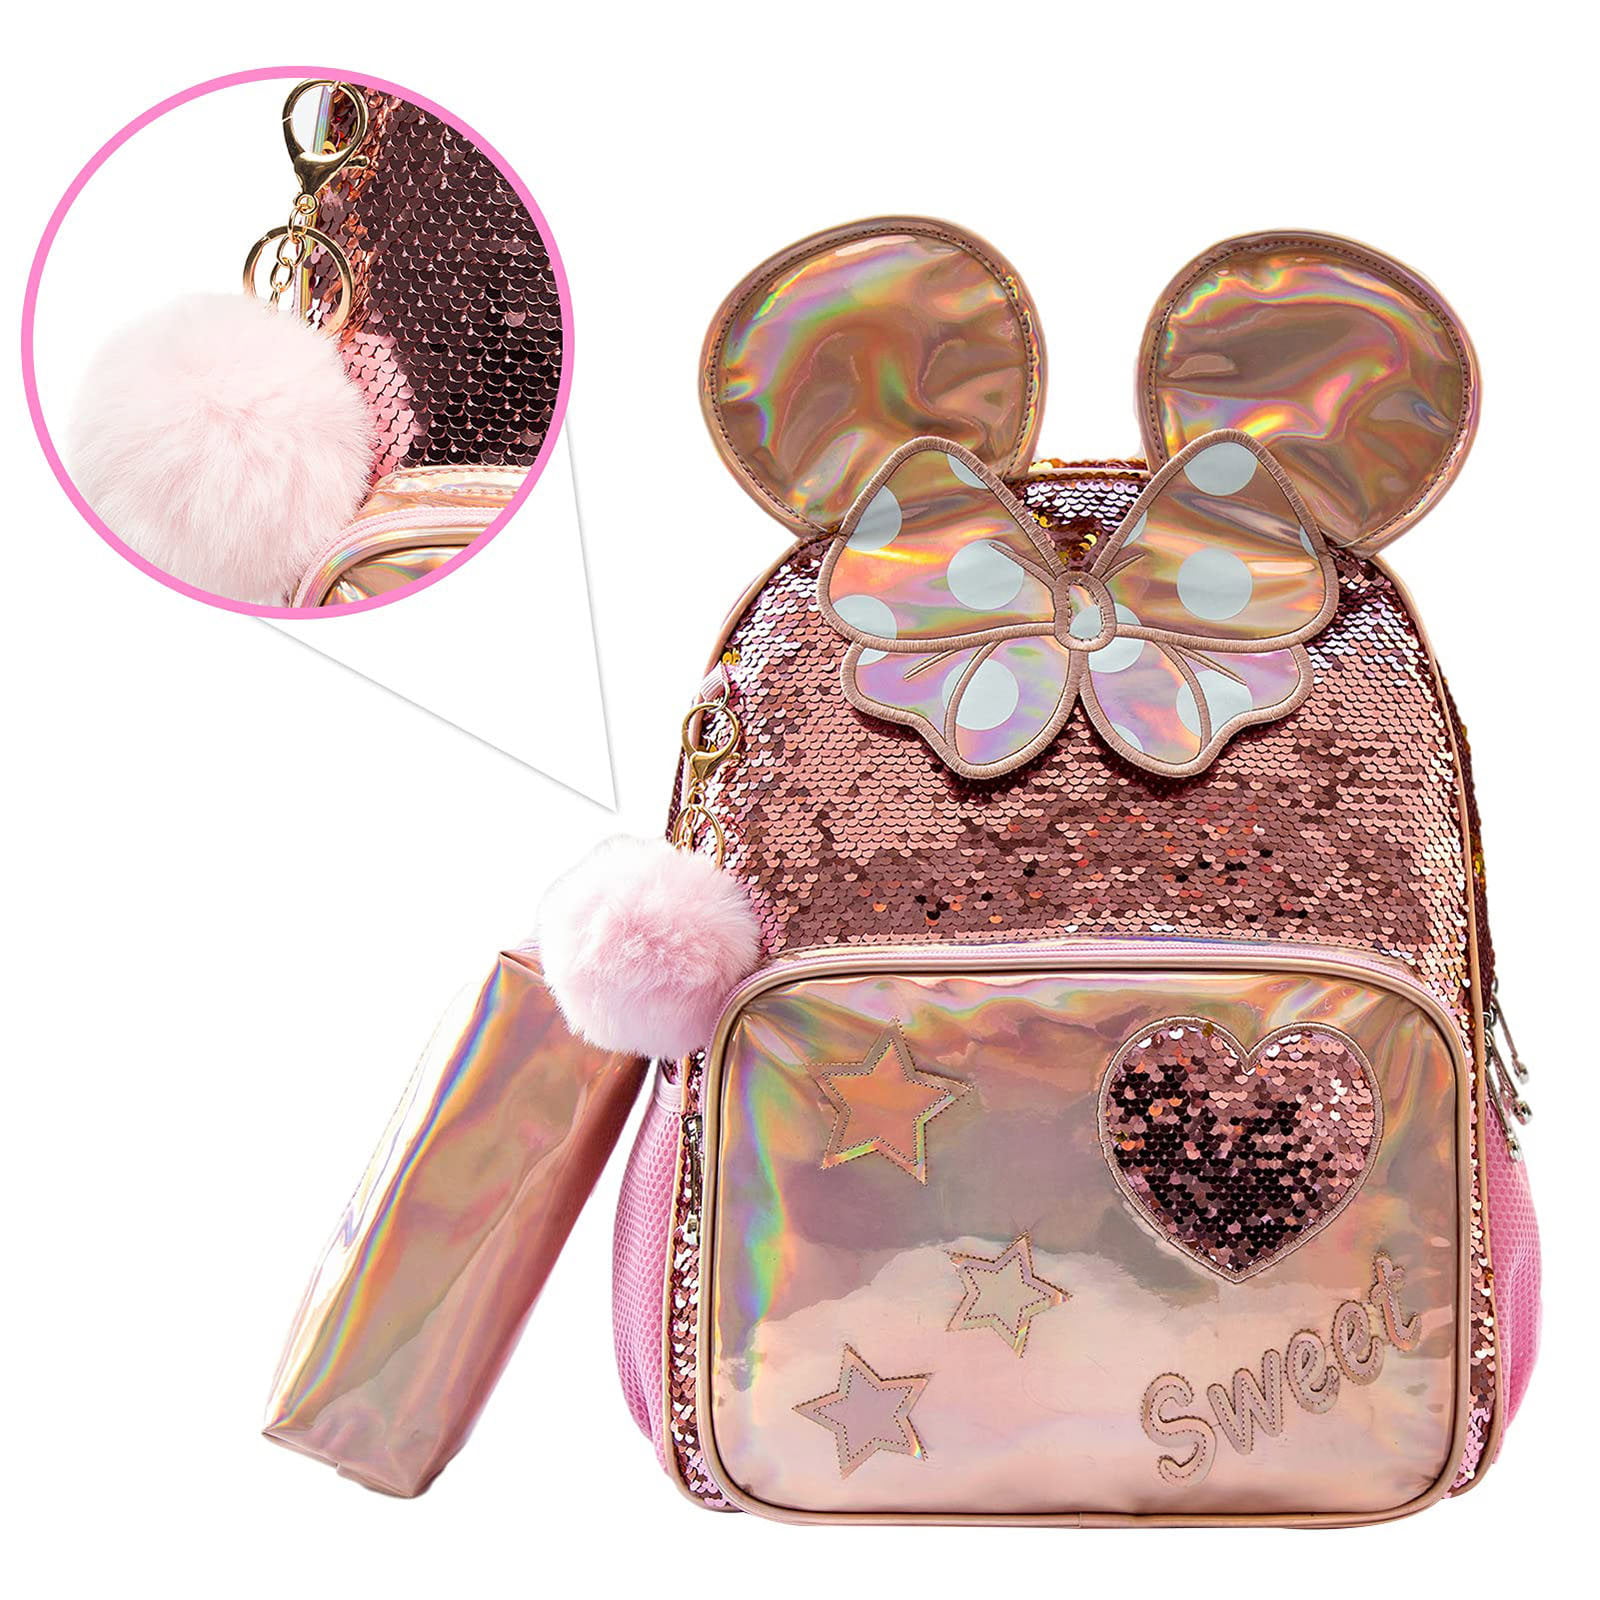 lvyH Women Girls 3 in 1 Rolling Backpack Sequins Backpacks with